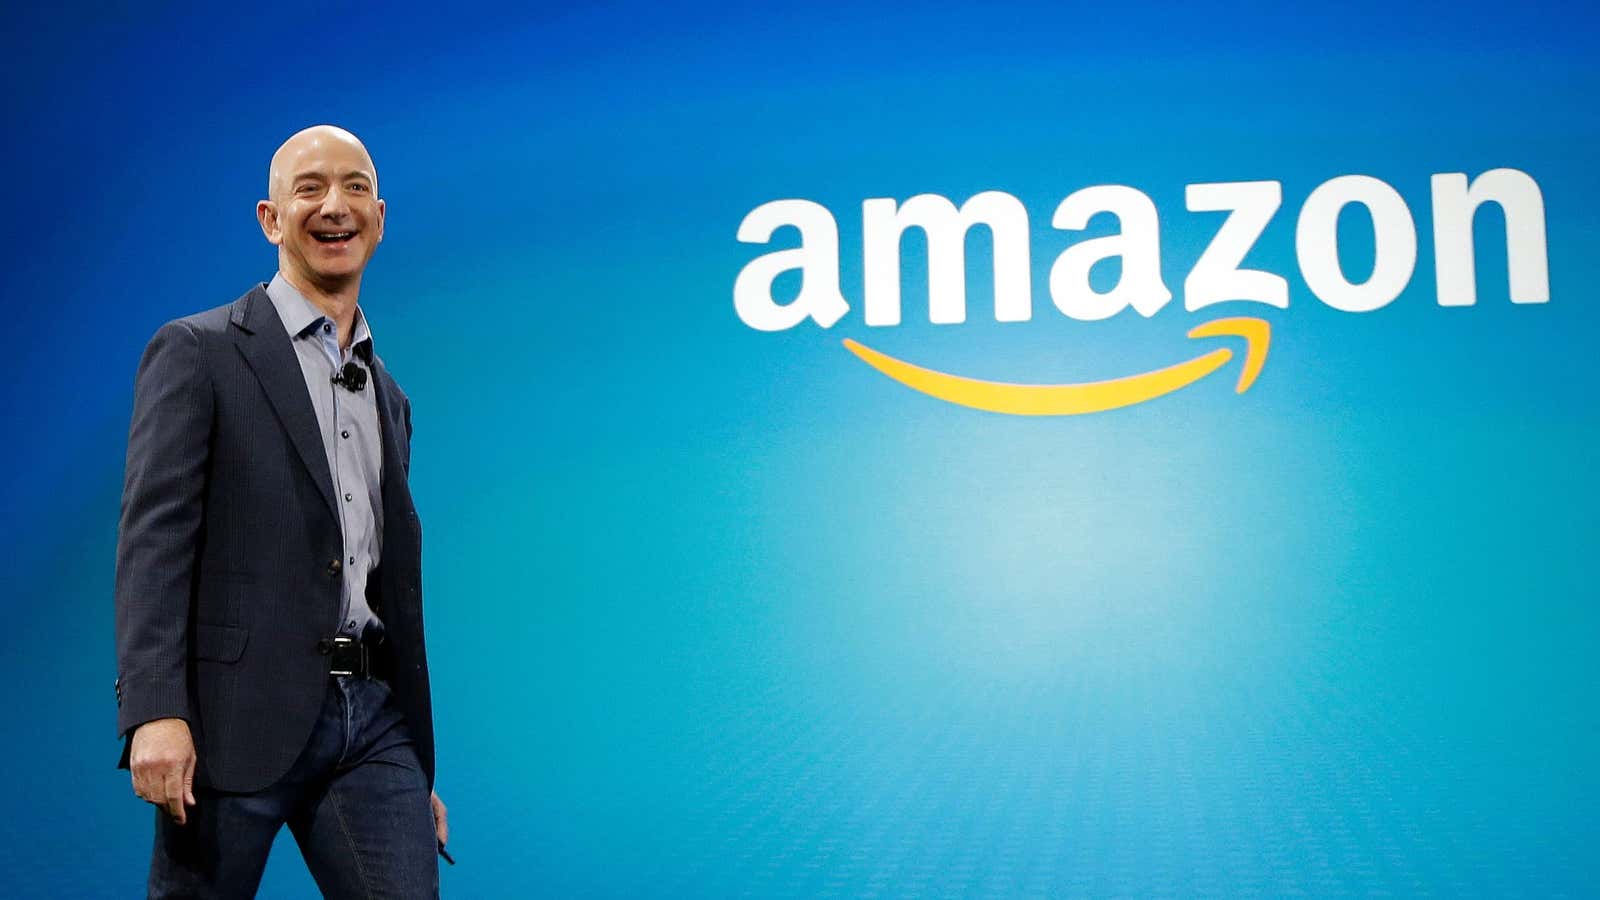 Amazon founder Jeff Bezos is turning business on its head.